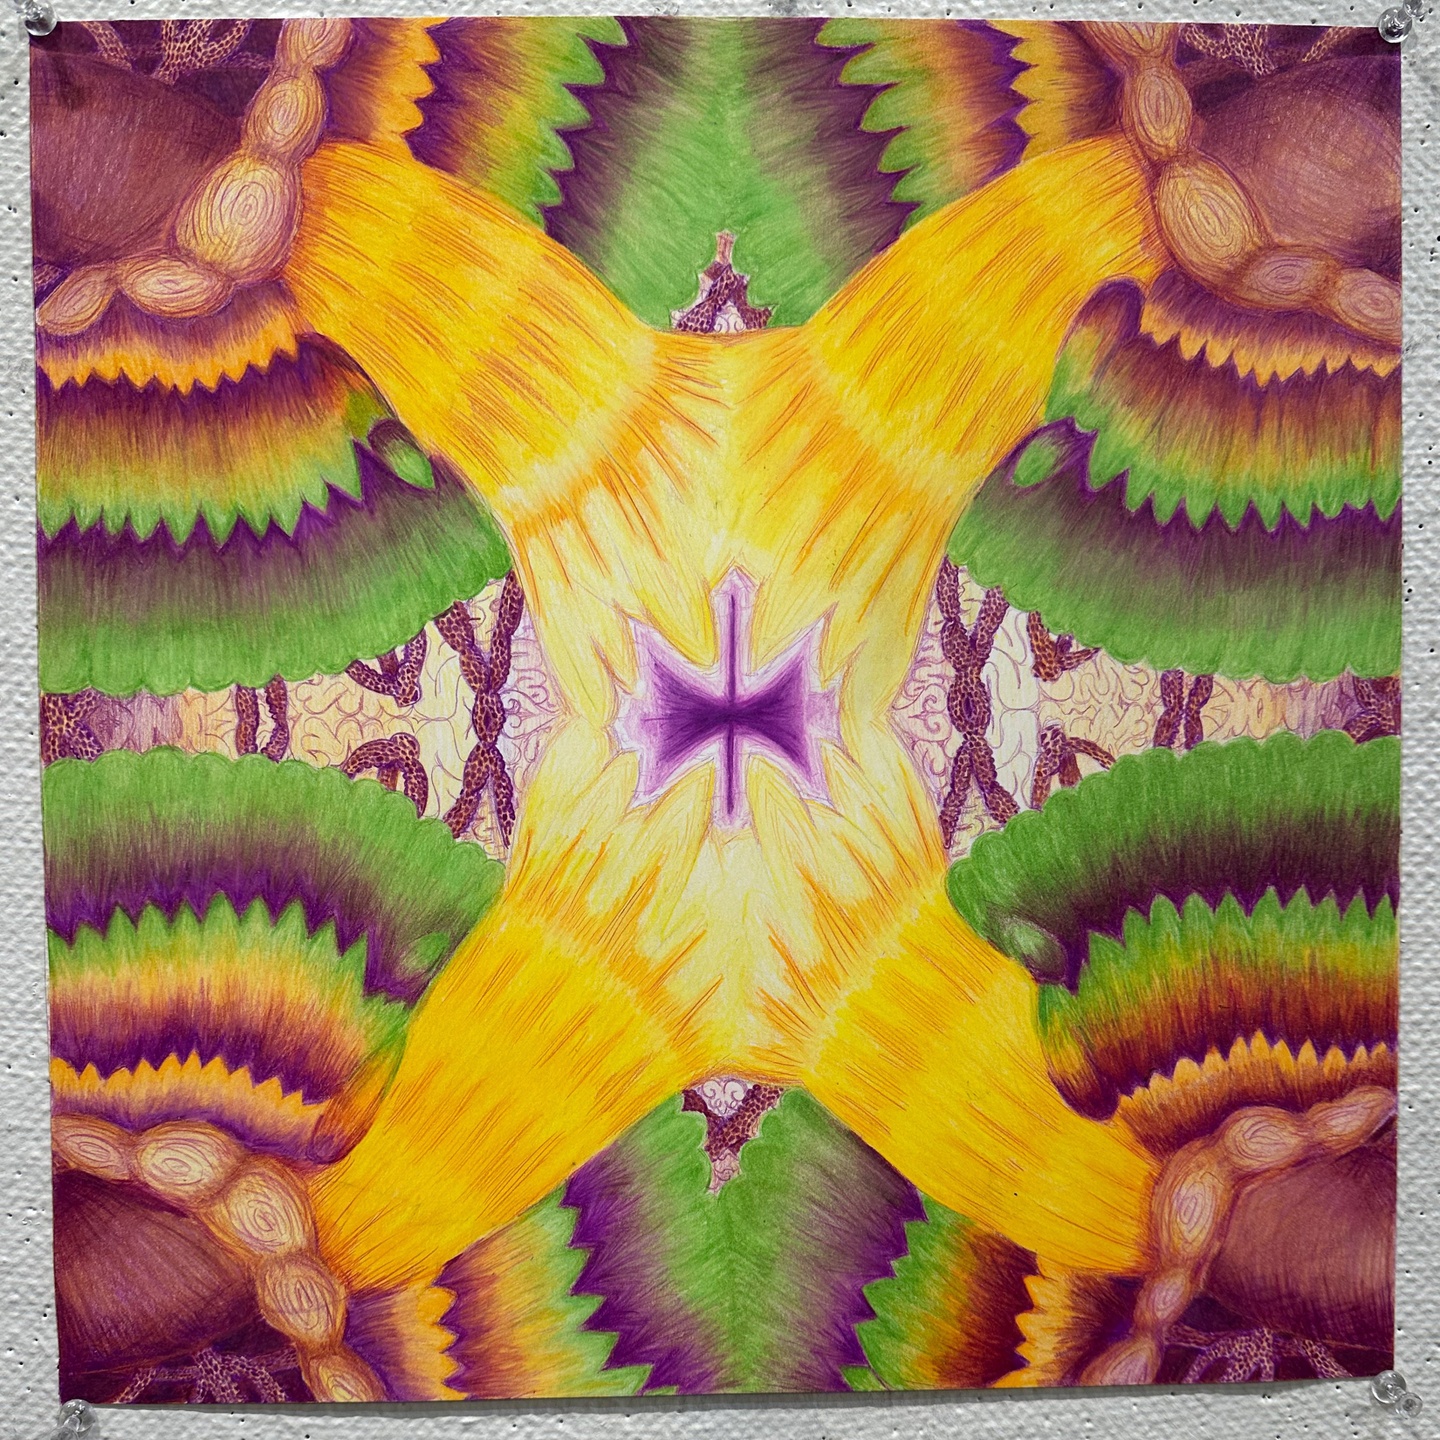 abstract image in yellows, greens and reds resembling the inside of a kaleidoscope